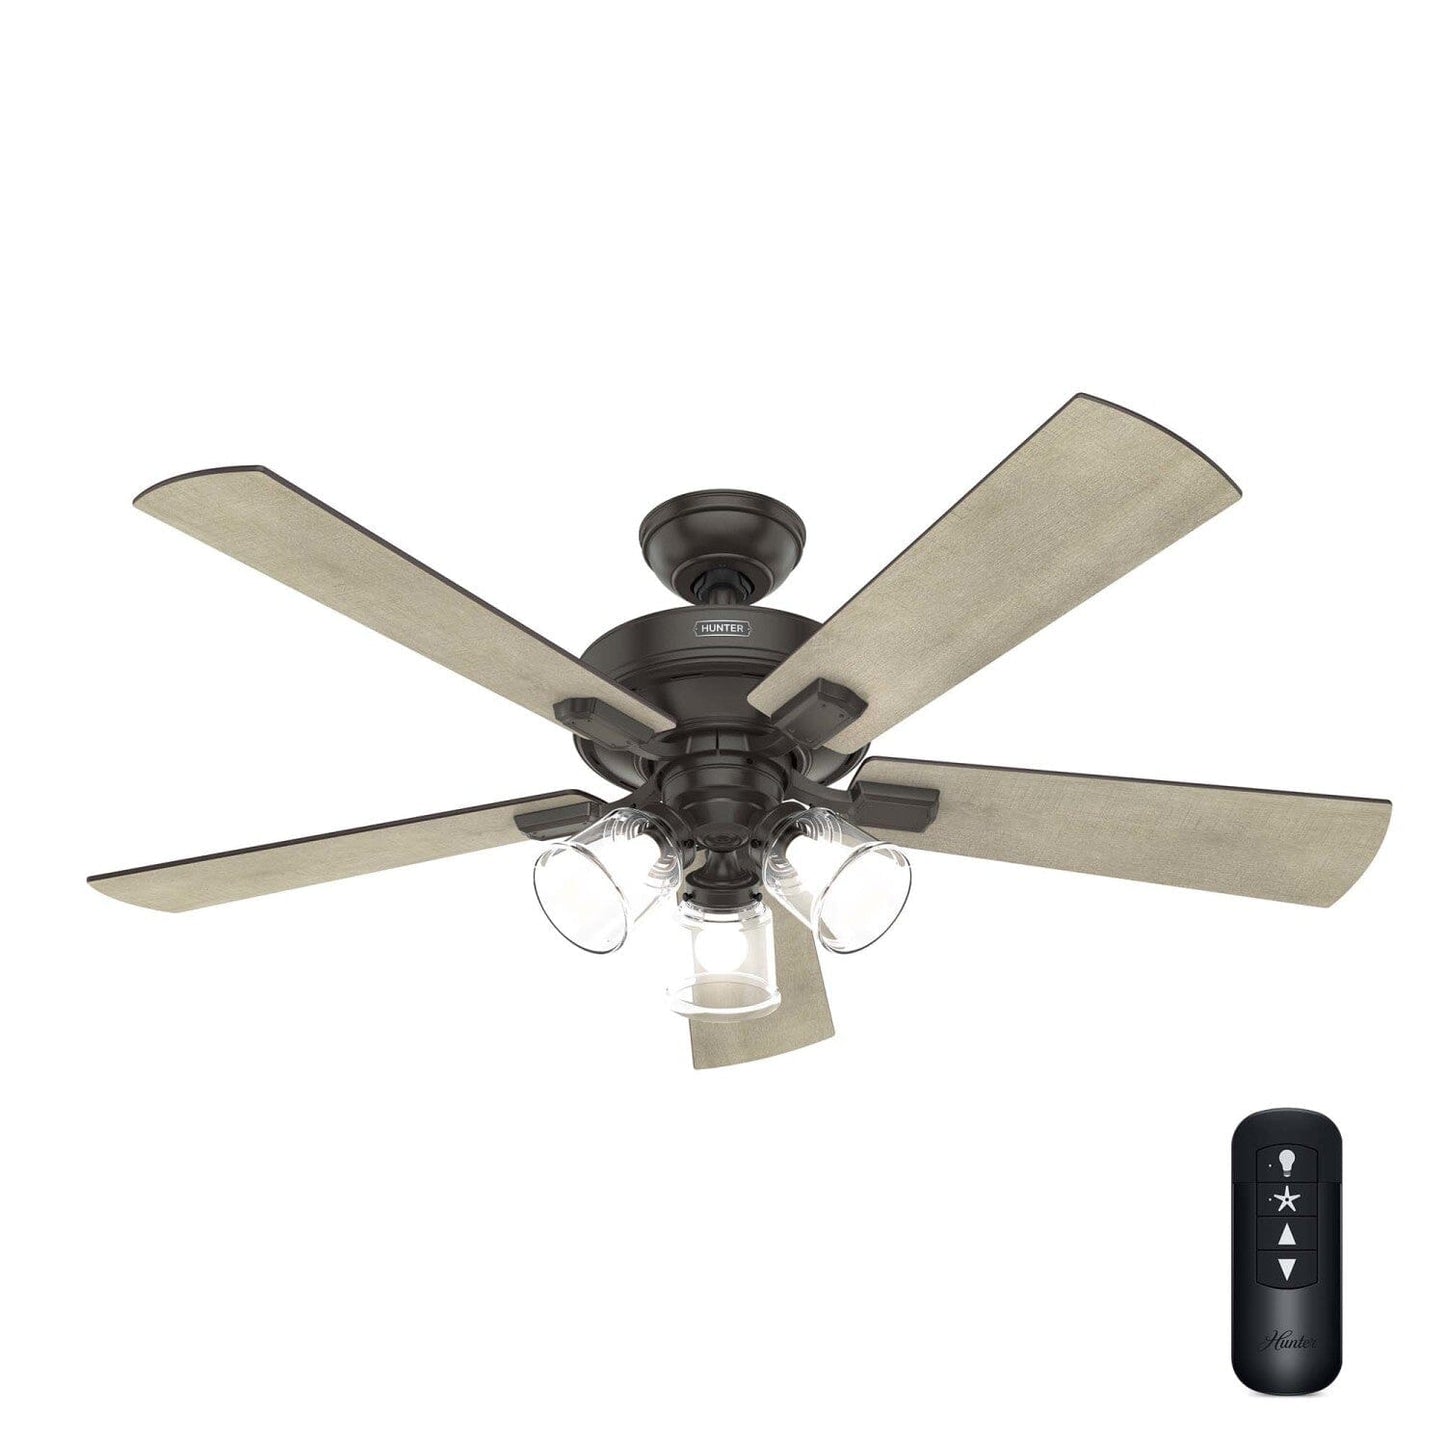 Crestfield with 3 LED Lights 52 inch with remote Ceiling Fans Hunter Noble Bronze - Bleached Grey Pine 